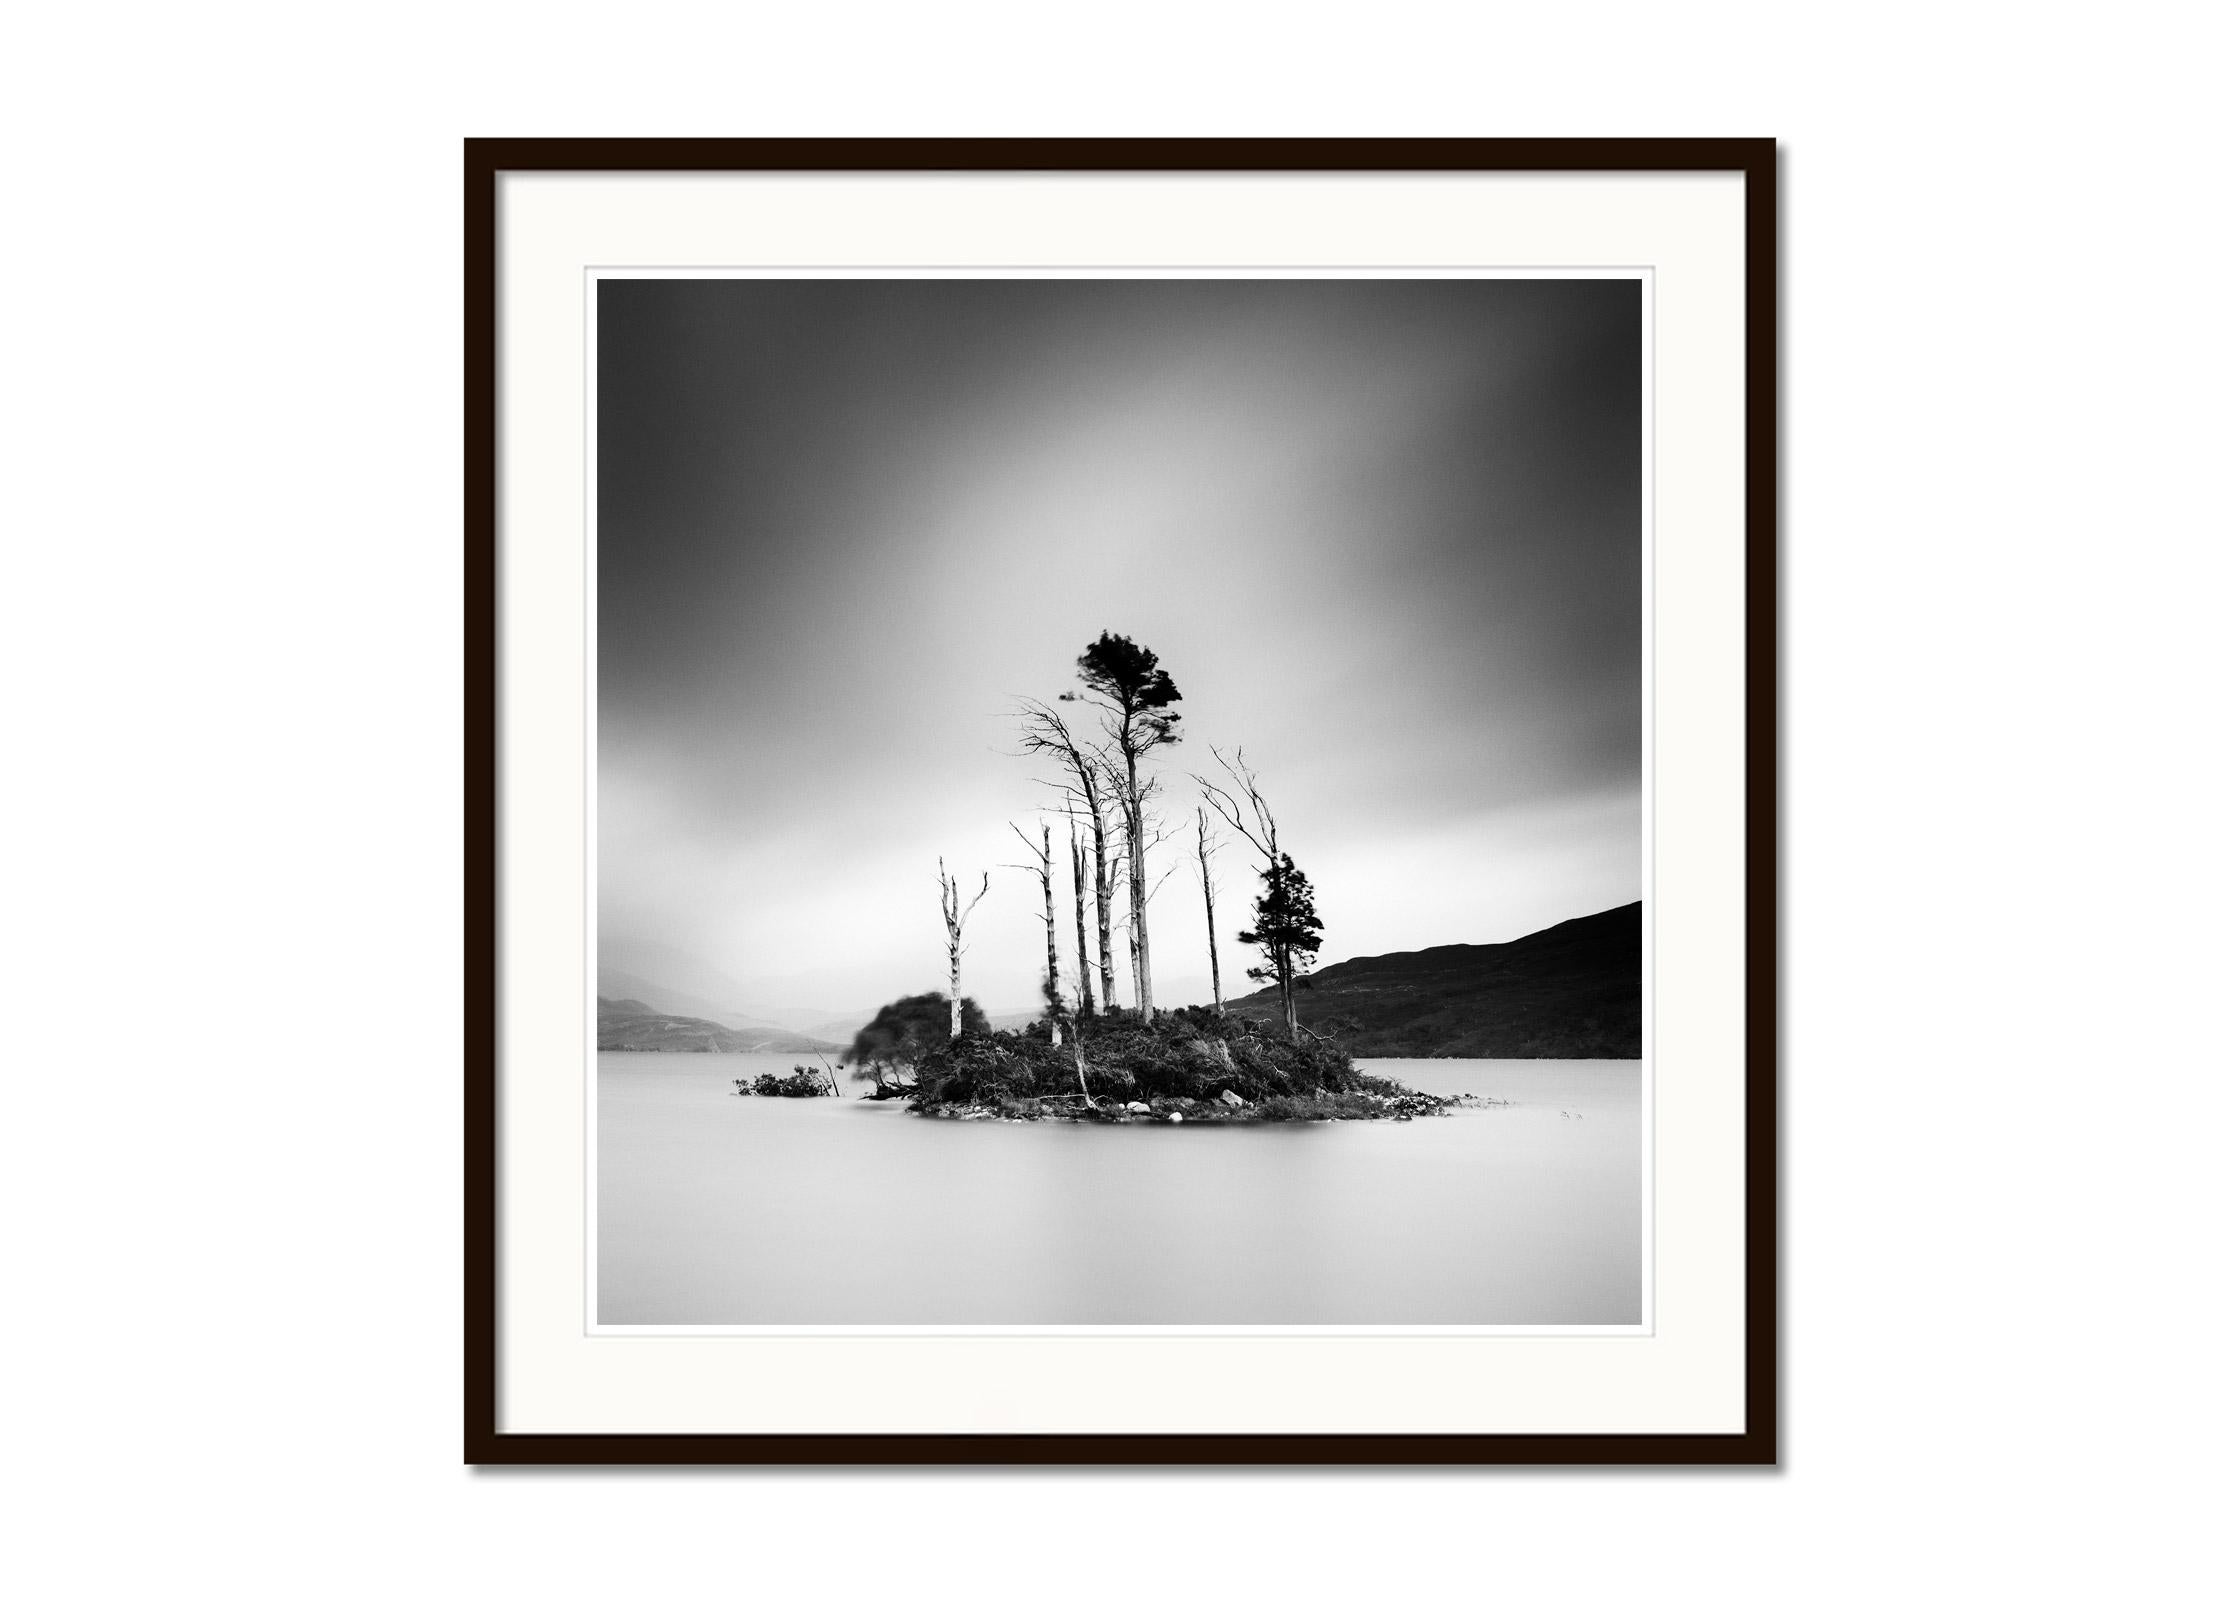 Drowned Island Trees in moor Scotland black and white landscape art photography - Gray Landscape Photograph by Gerald Berghammer